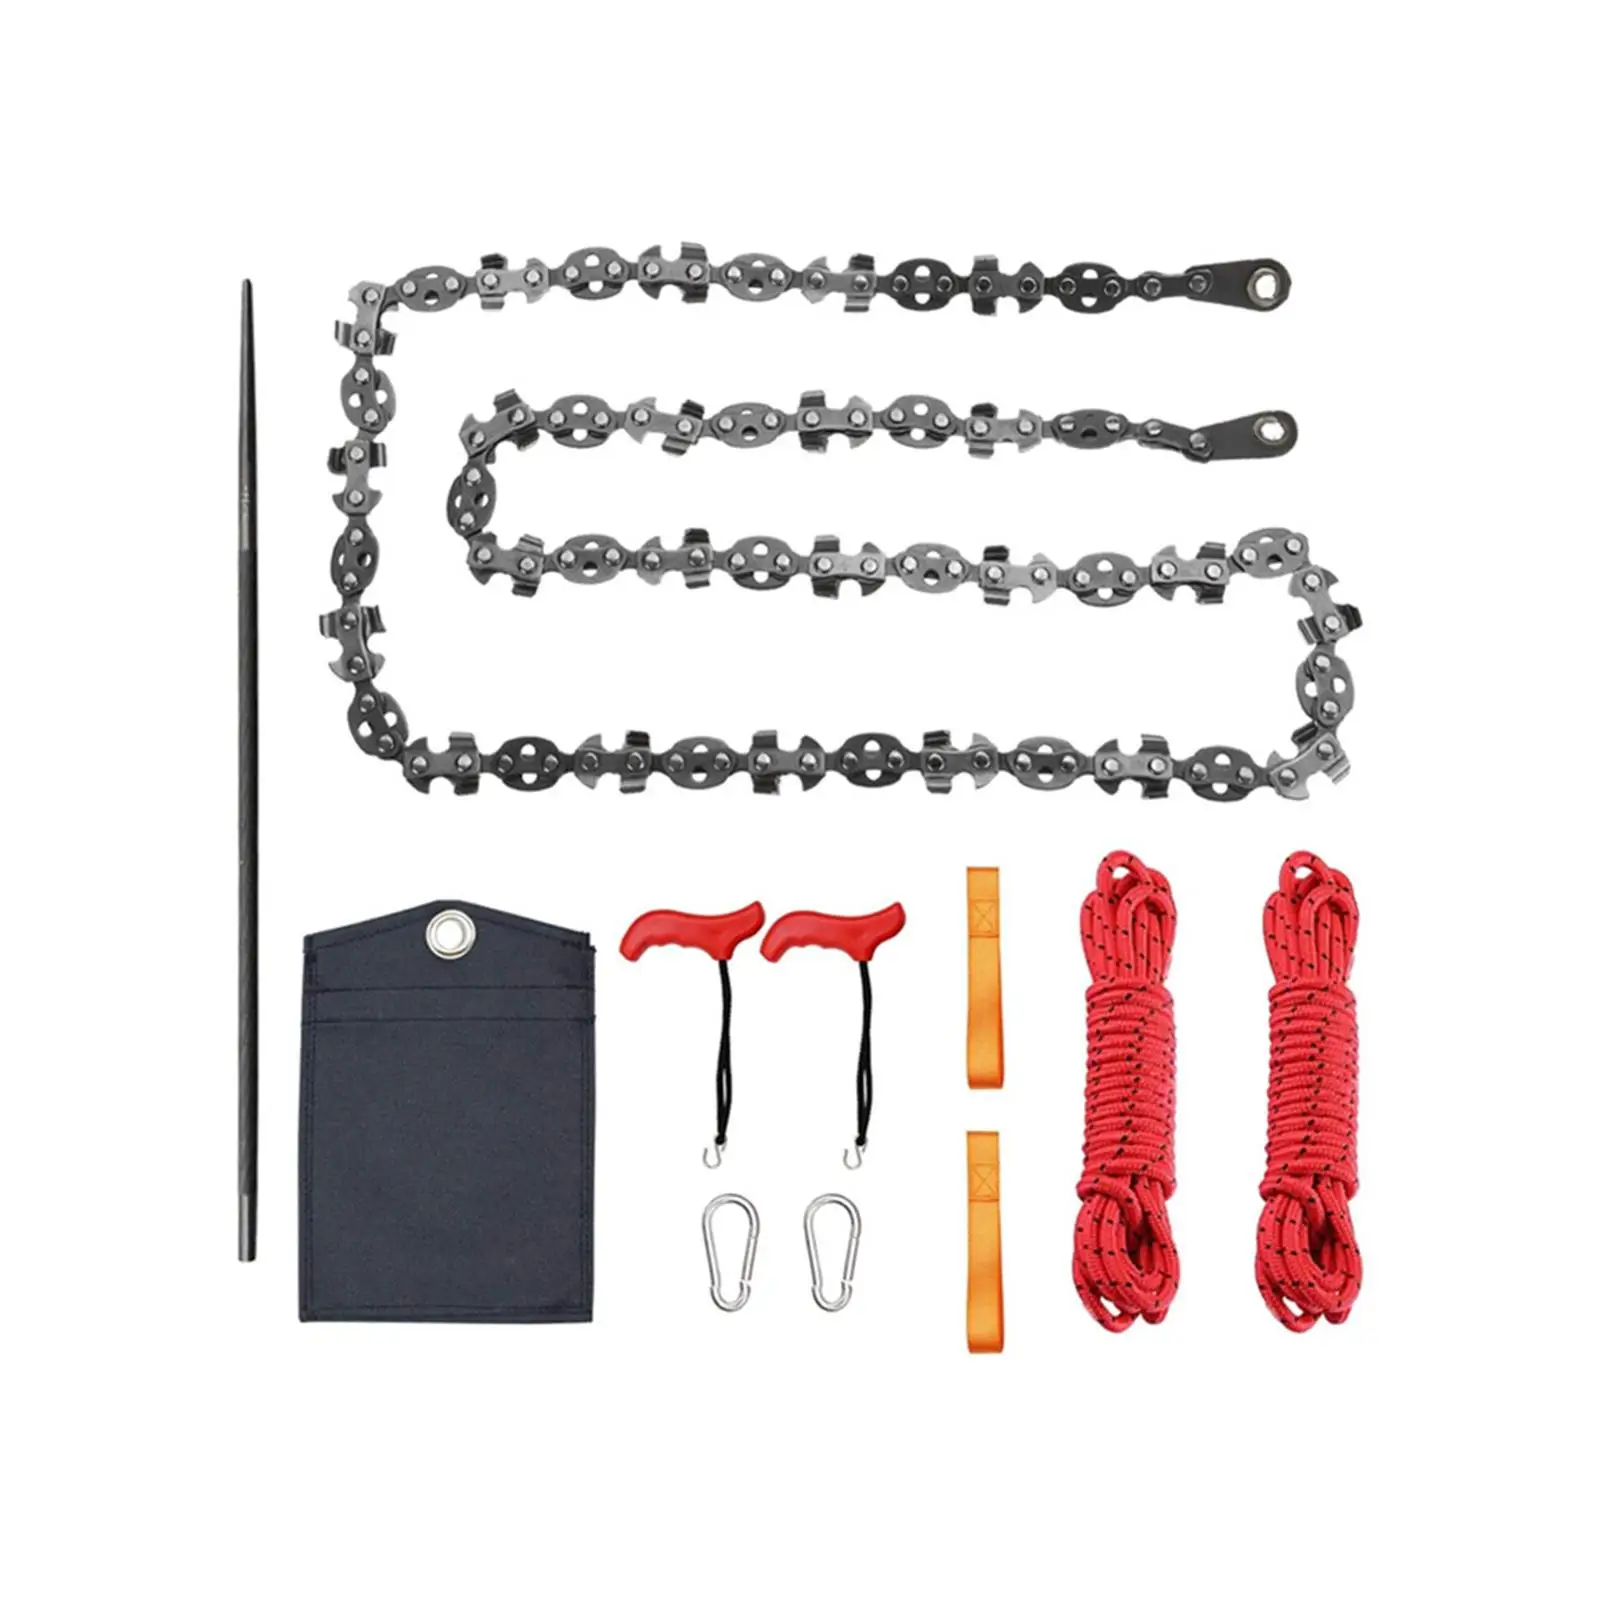 Pocket Saw Includes Ropes, S Hooks, Carabiner and Accessory Wood Cutting for Camping Outdoor Emergency Fishermen Gardening